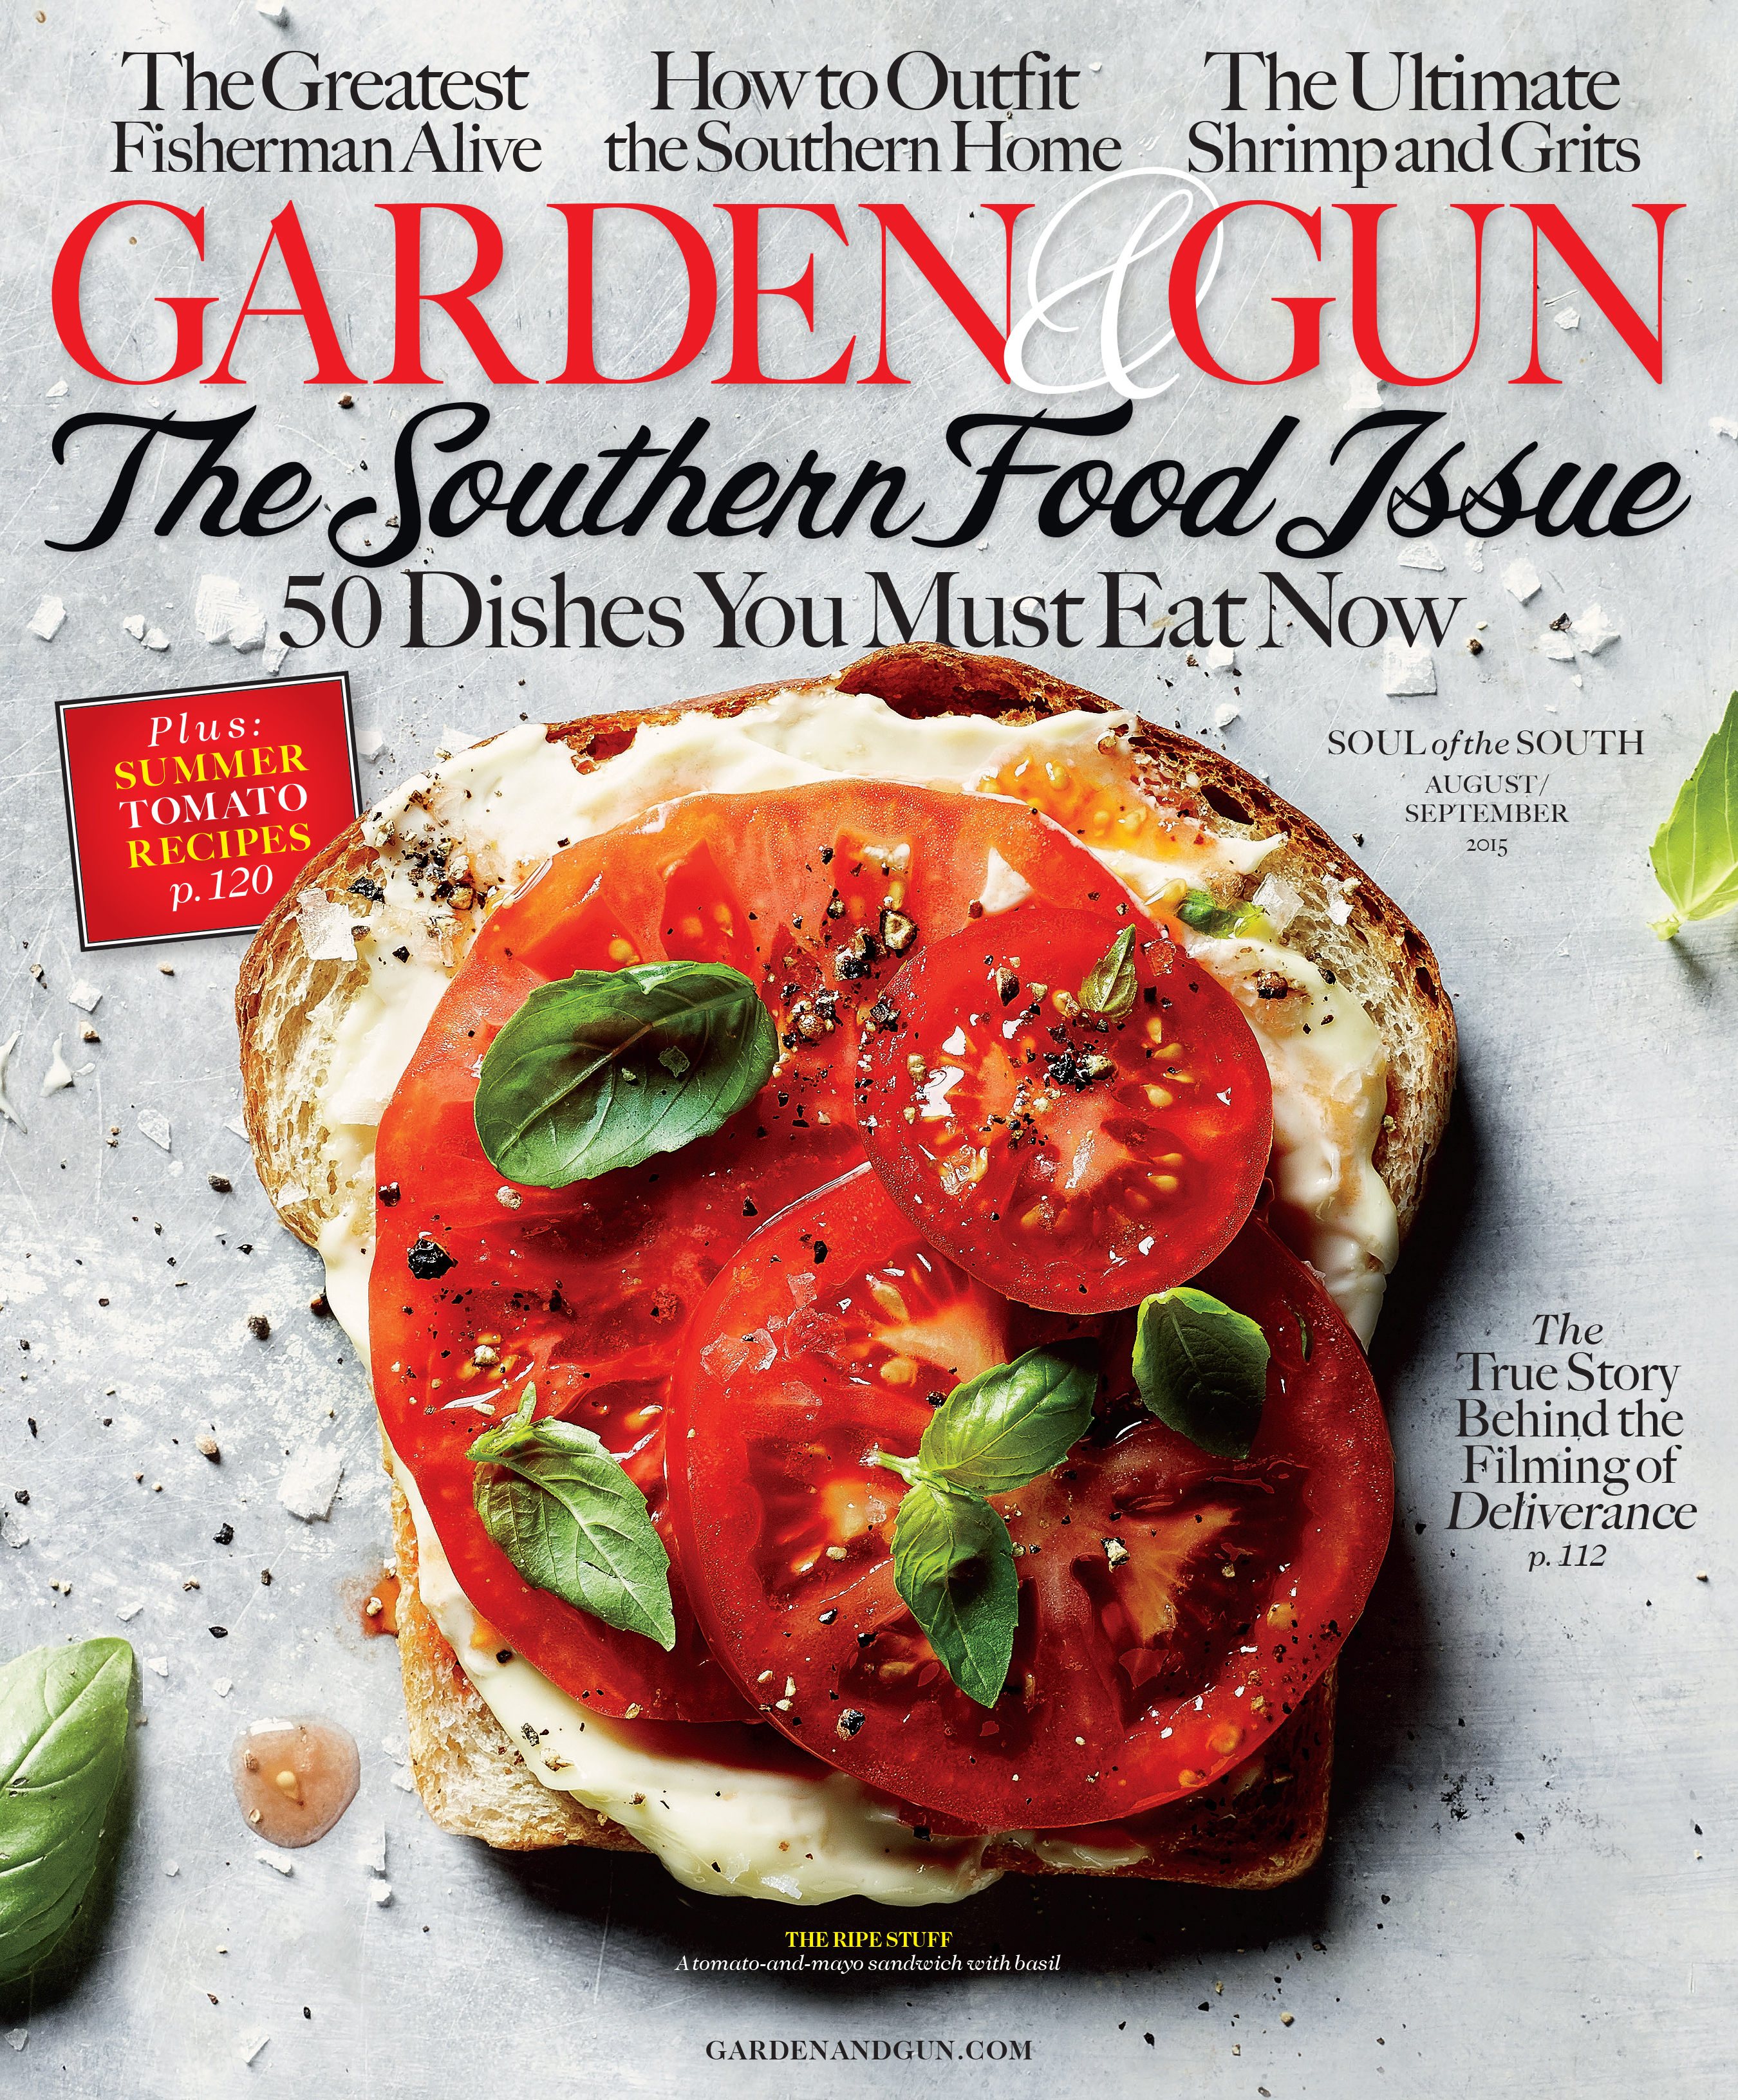 Garden and Gun-"The Southern Food Issue," August/September